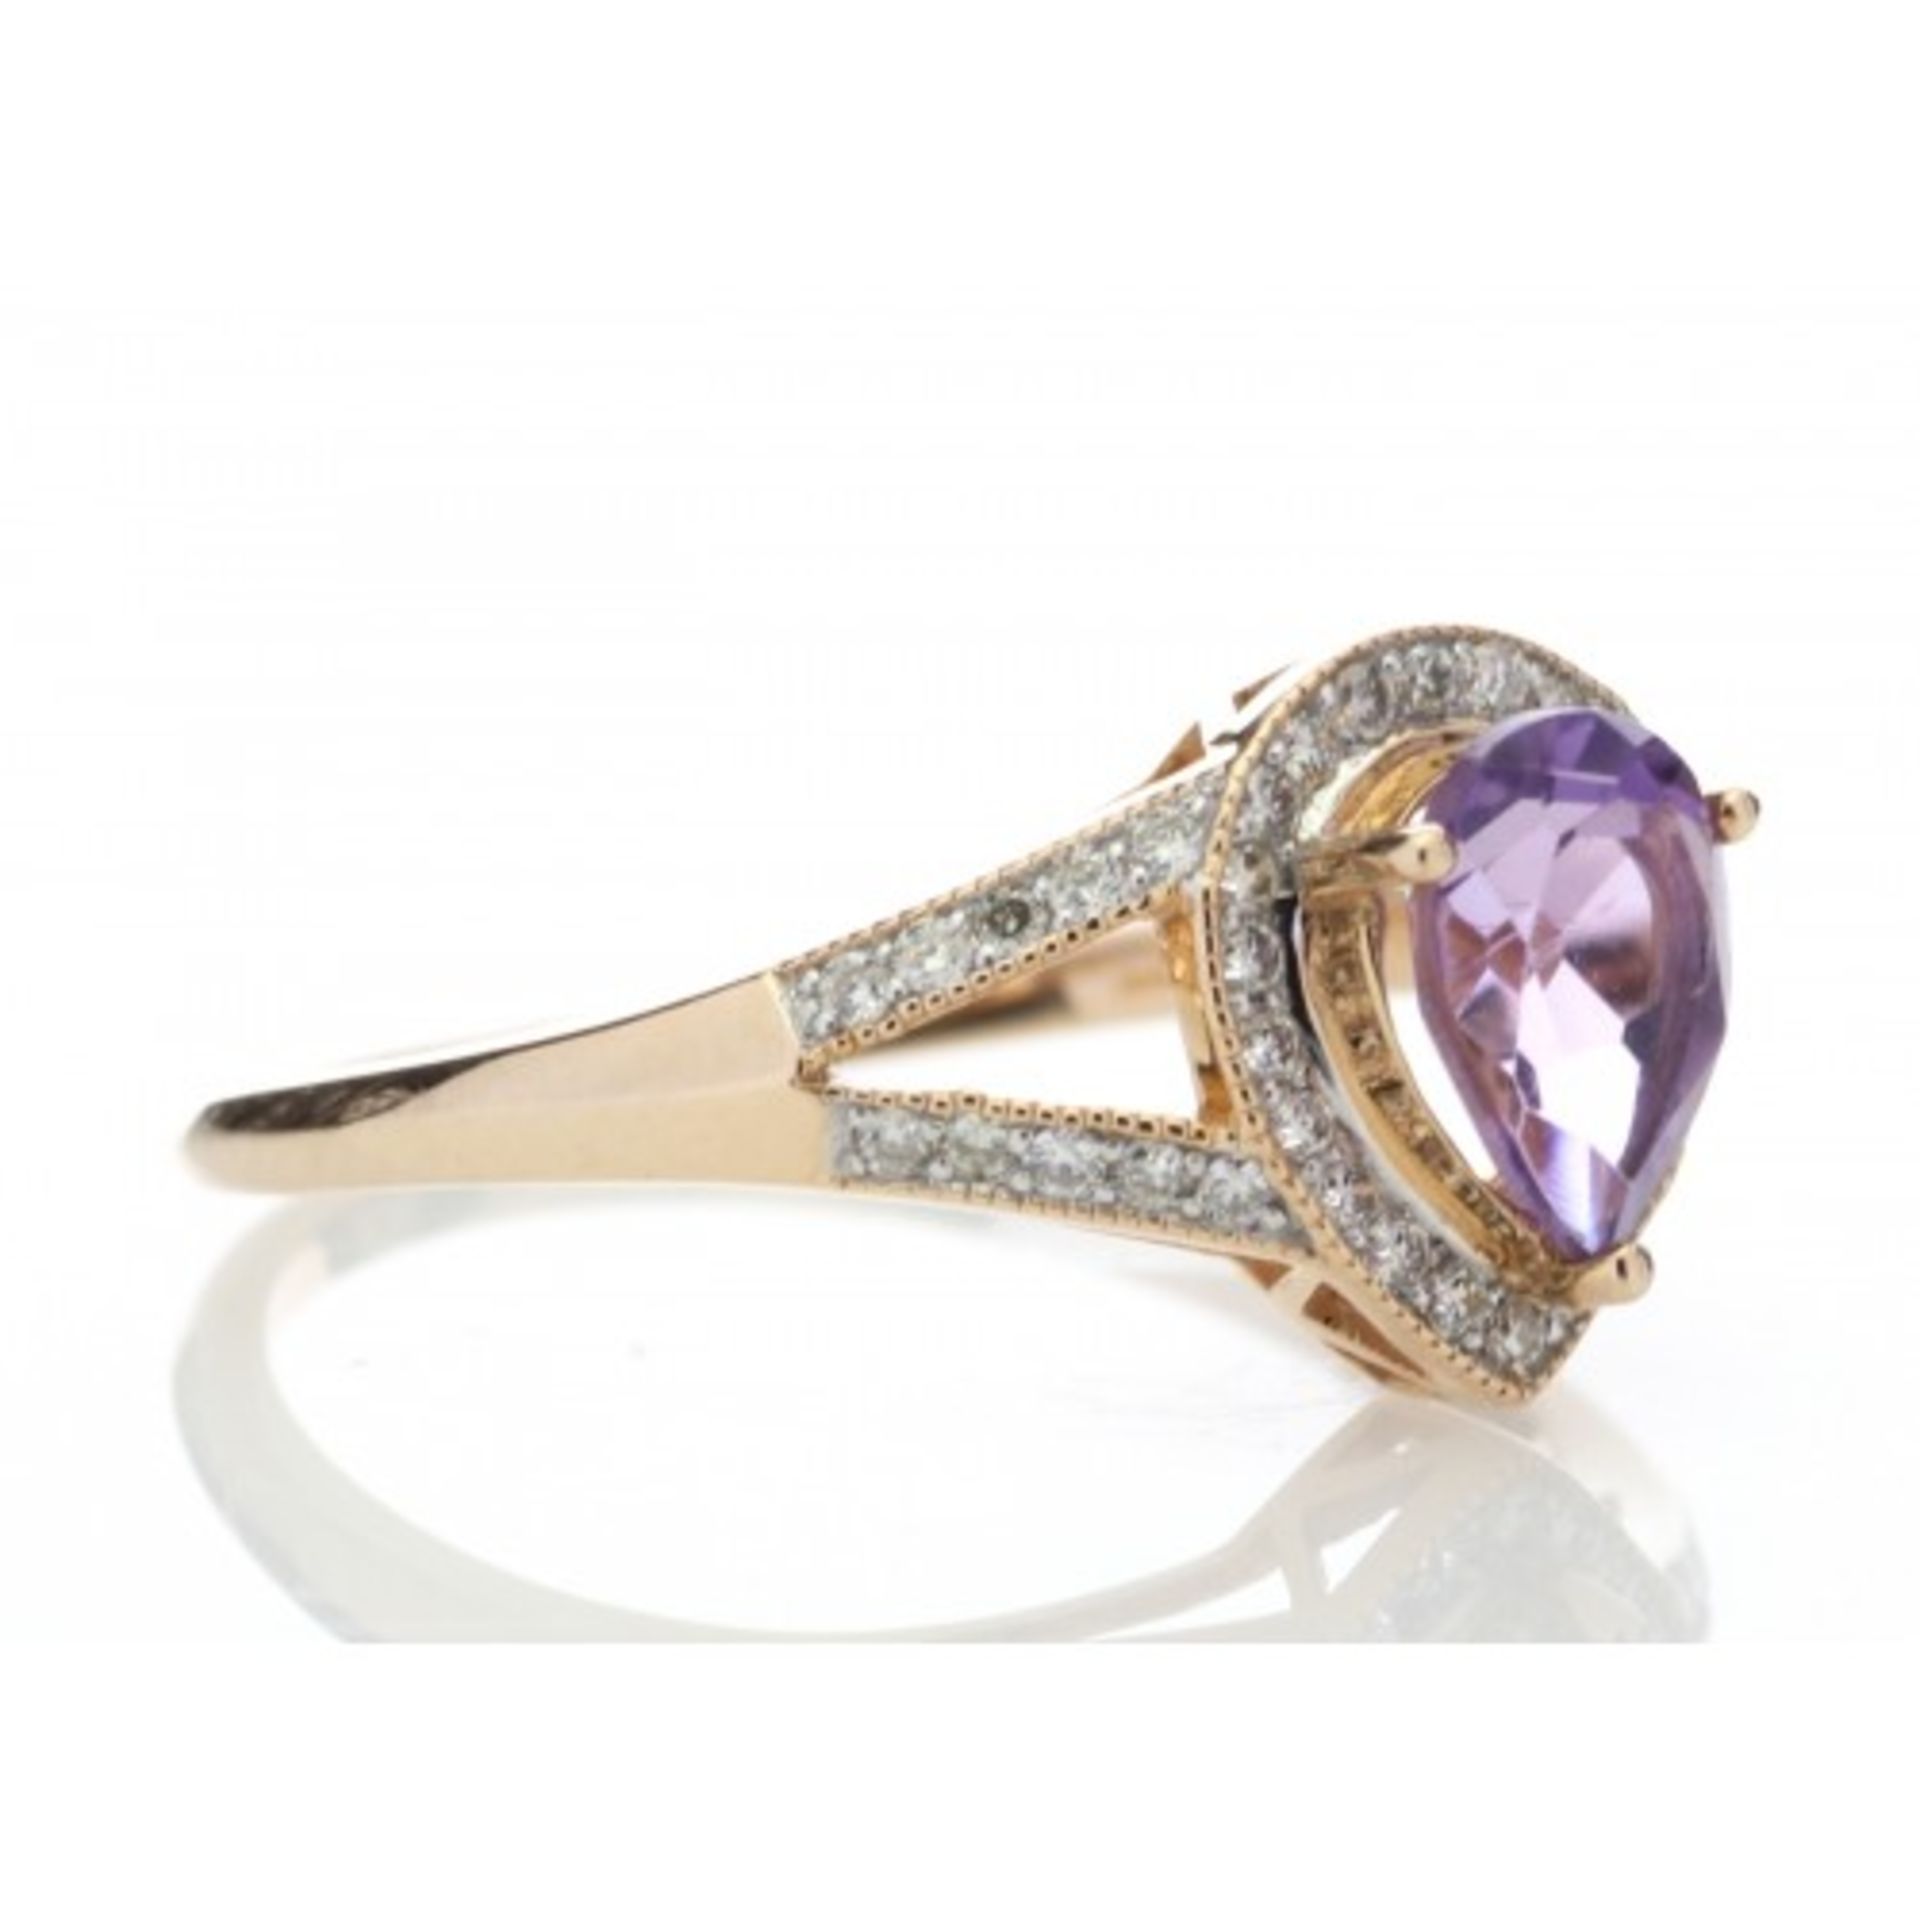 0.63ct amethyst and diamond dress ring set in 9ct rose gold. Pear shaped centre stone surrounded - Image 3 of 5